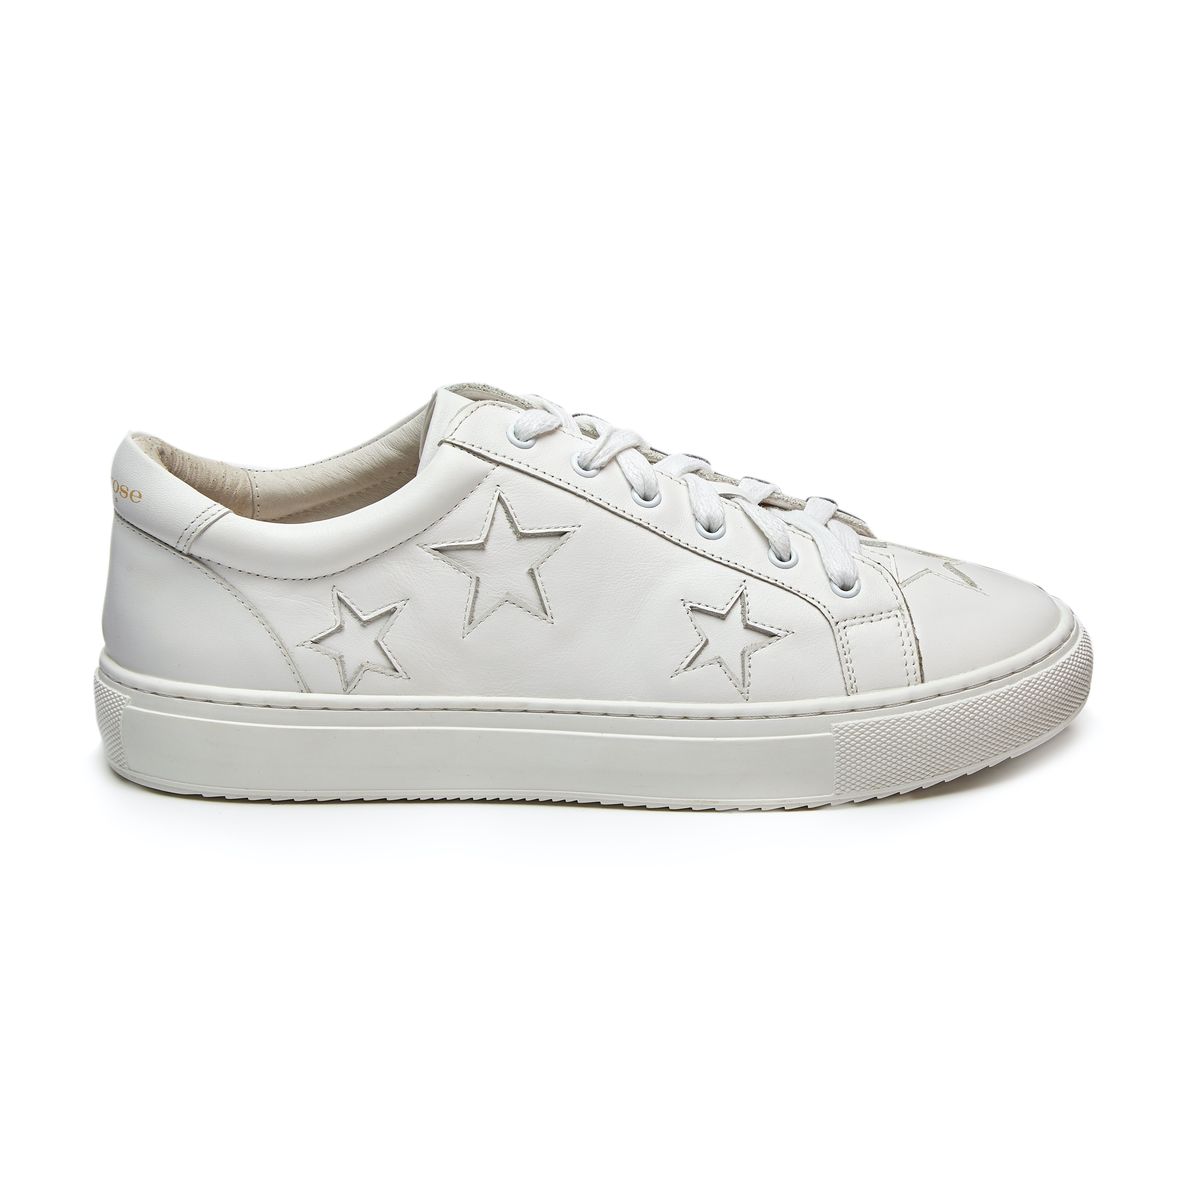 Cocorose London Hoxton White with White Stars comfort trainers